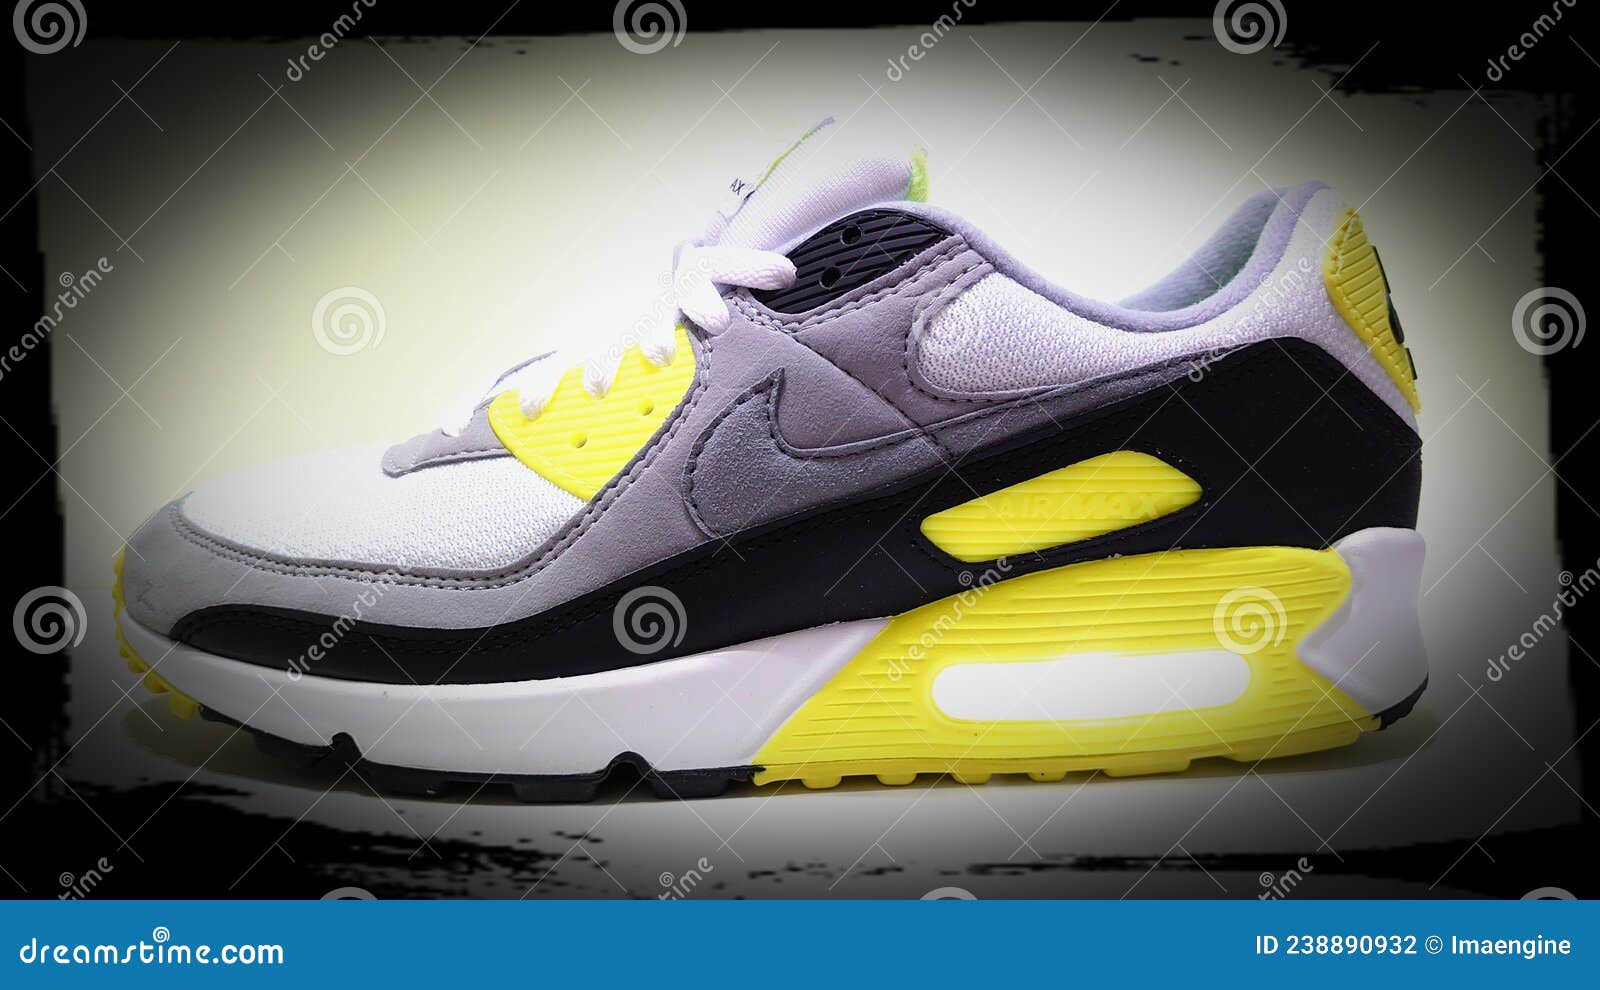 1,003 Nike Air Max Photos - Free & Royalty-Free Stock Photos from ... شيفروليه كامارو